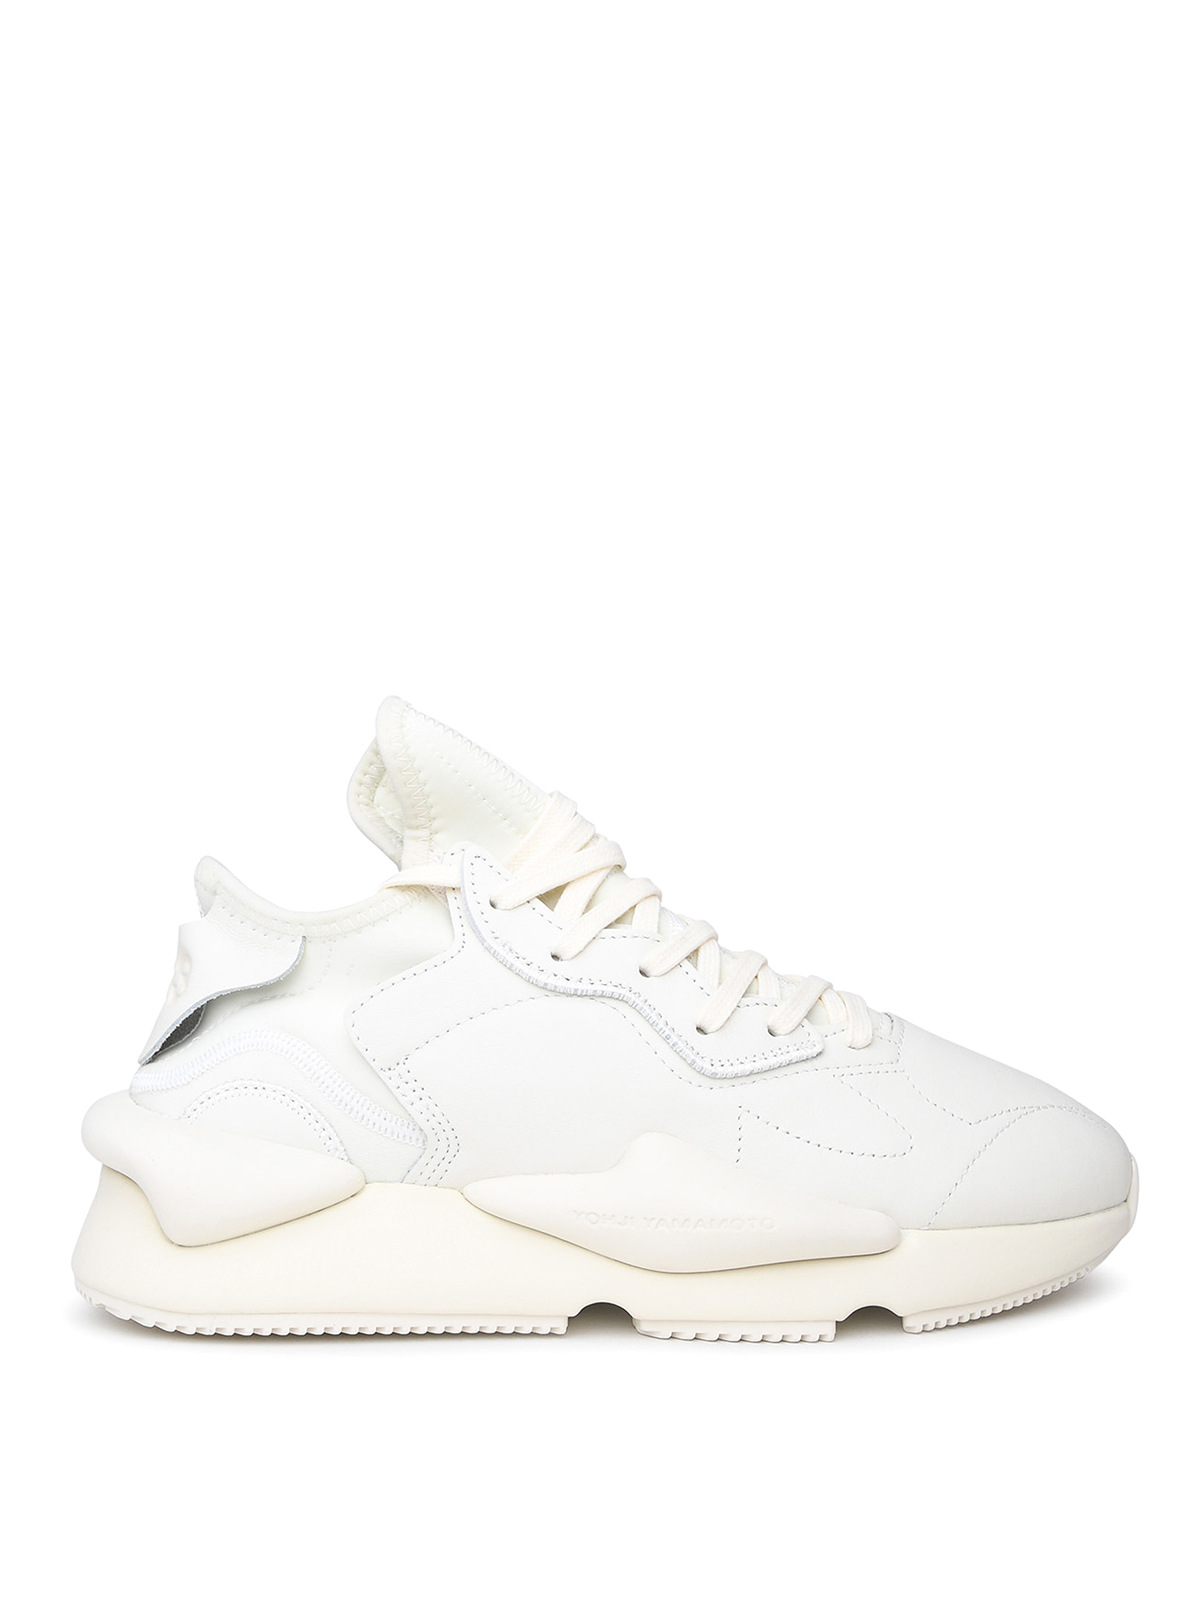 Trainers Y-3 - Kaiwa sneaker in white leather - FZ6384 | iKRIX.com